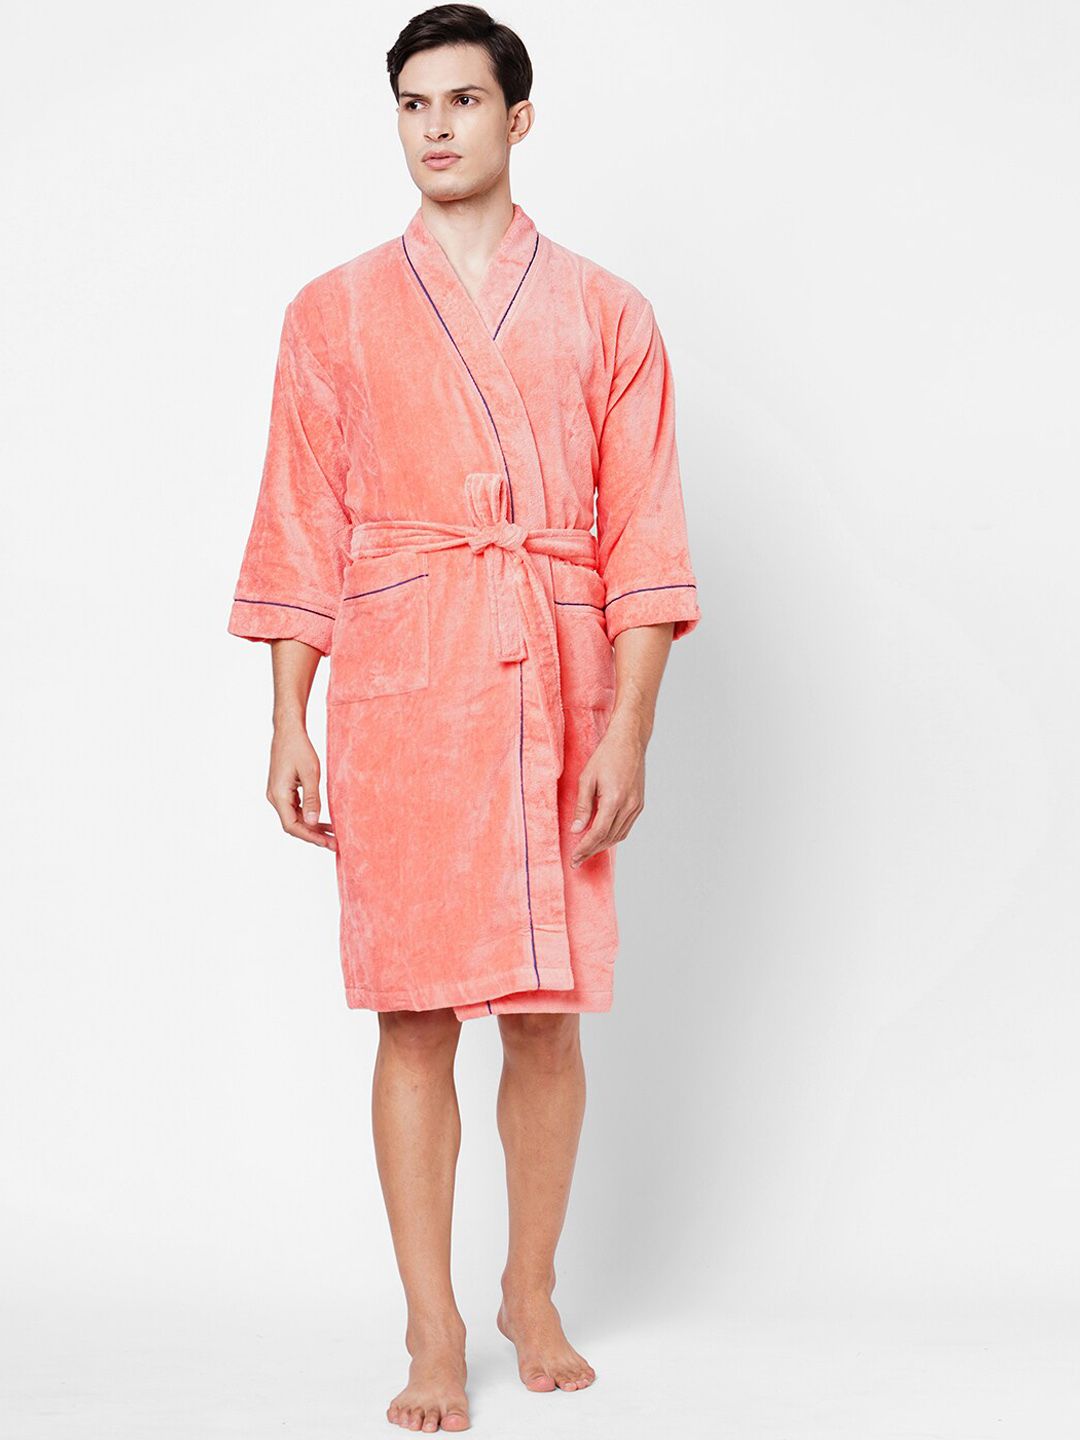 SPACES Coral Solid Pure Cotton 380 GSM Bath Robe Price in India